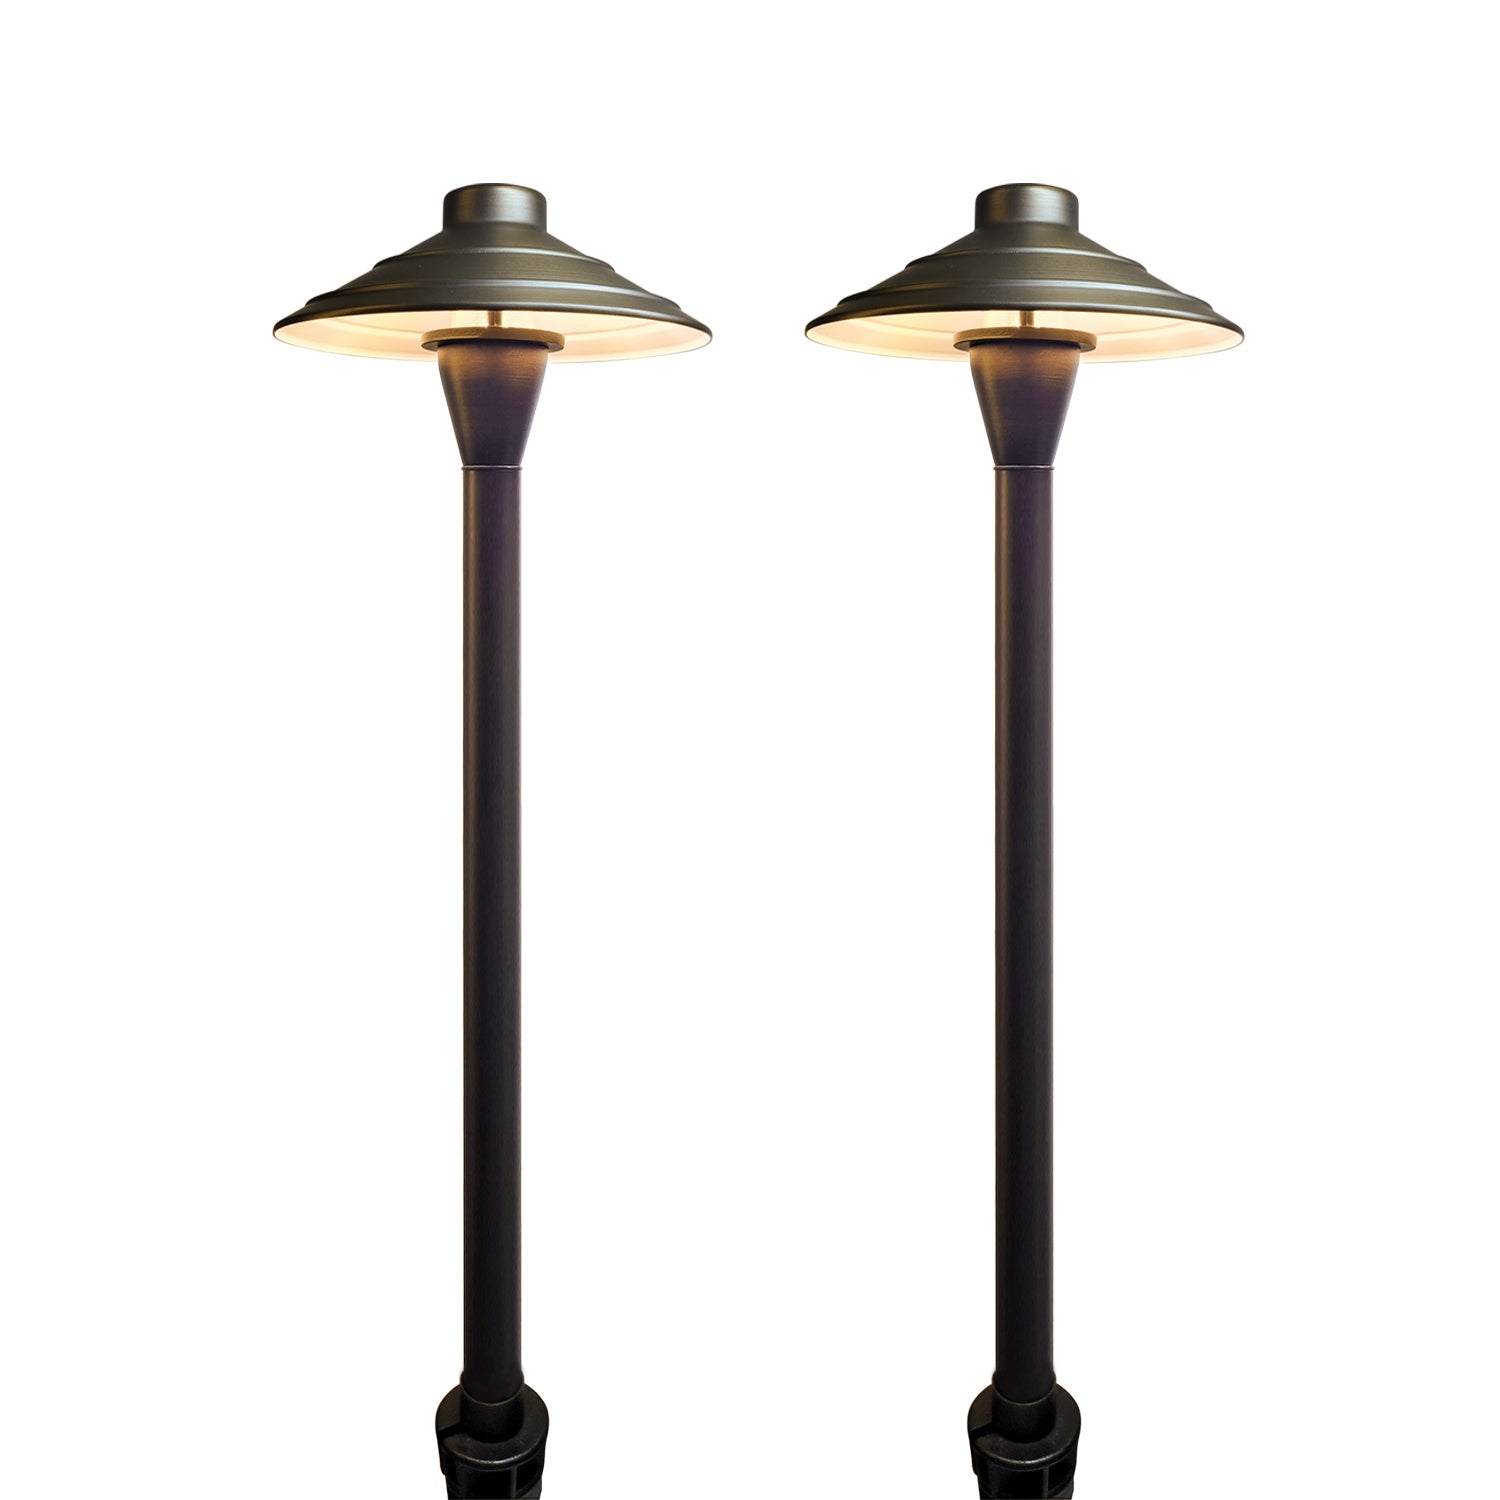 Pair of LED Low Voltage Brass Outdoor Garden Pathway Lights COP601B against a white background